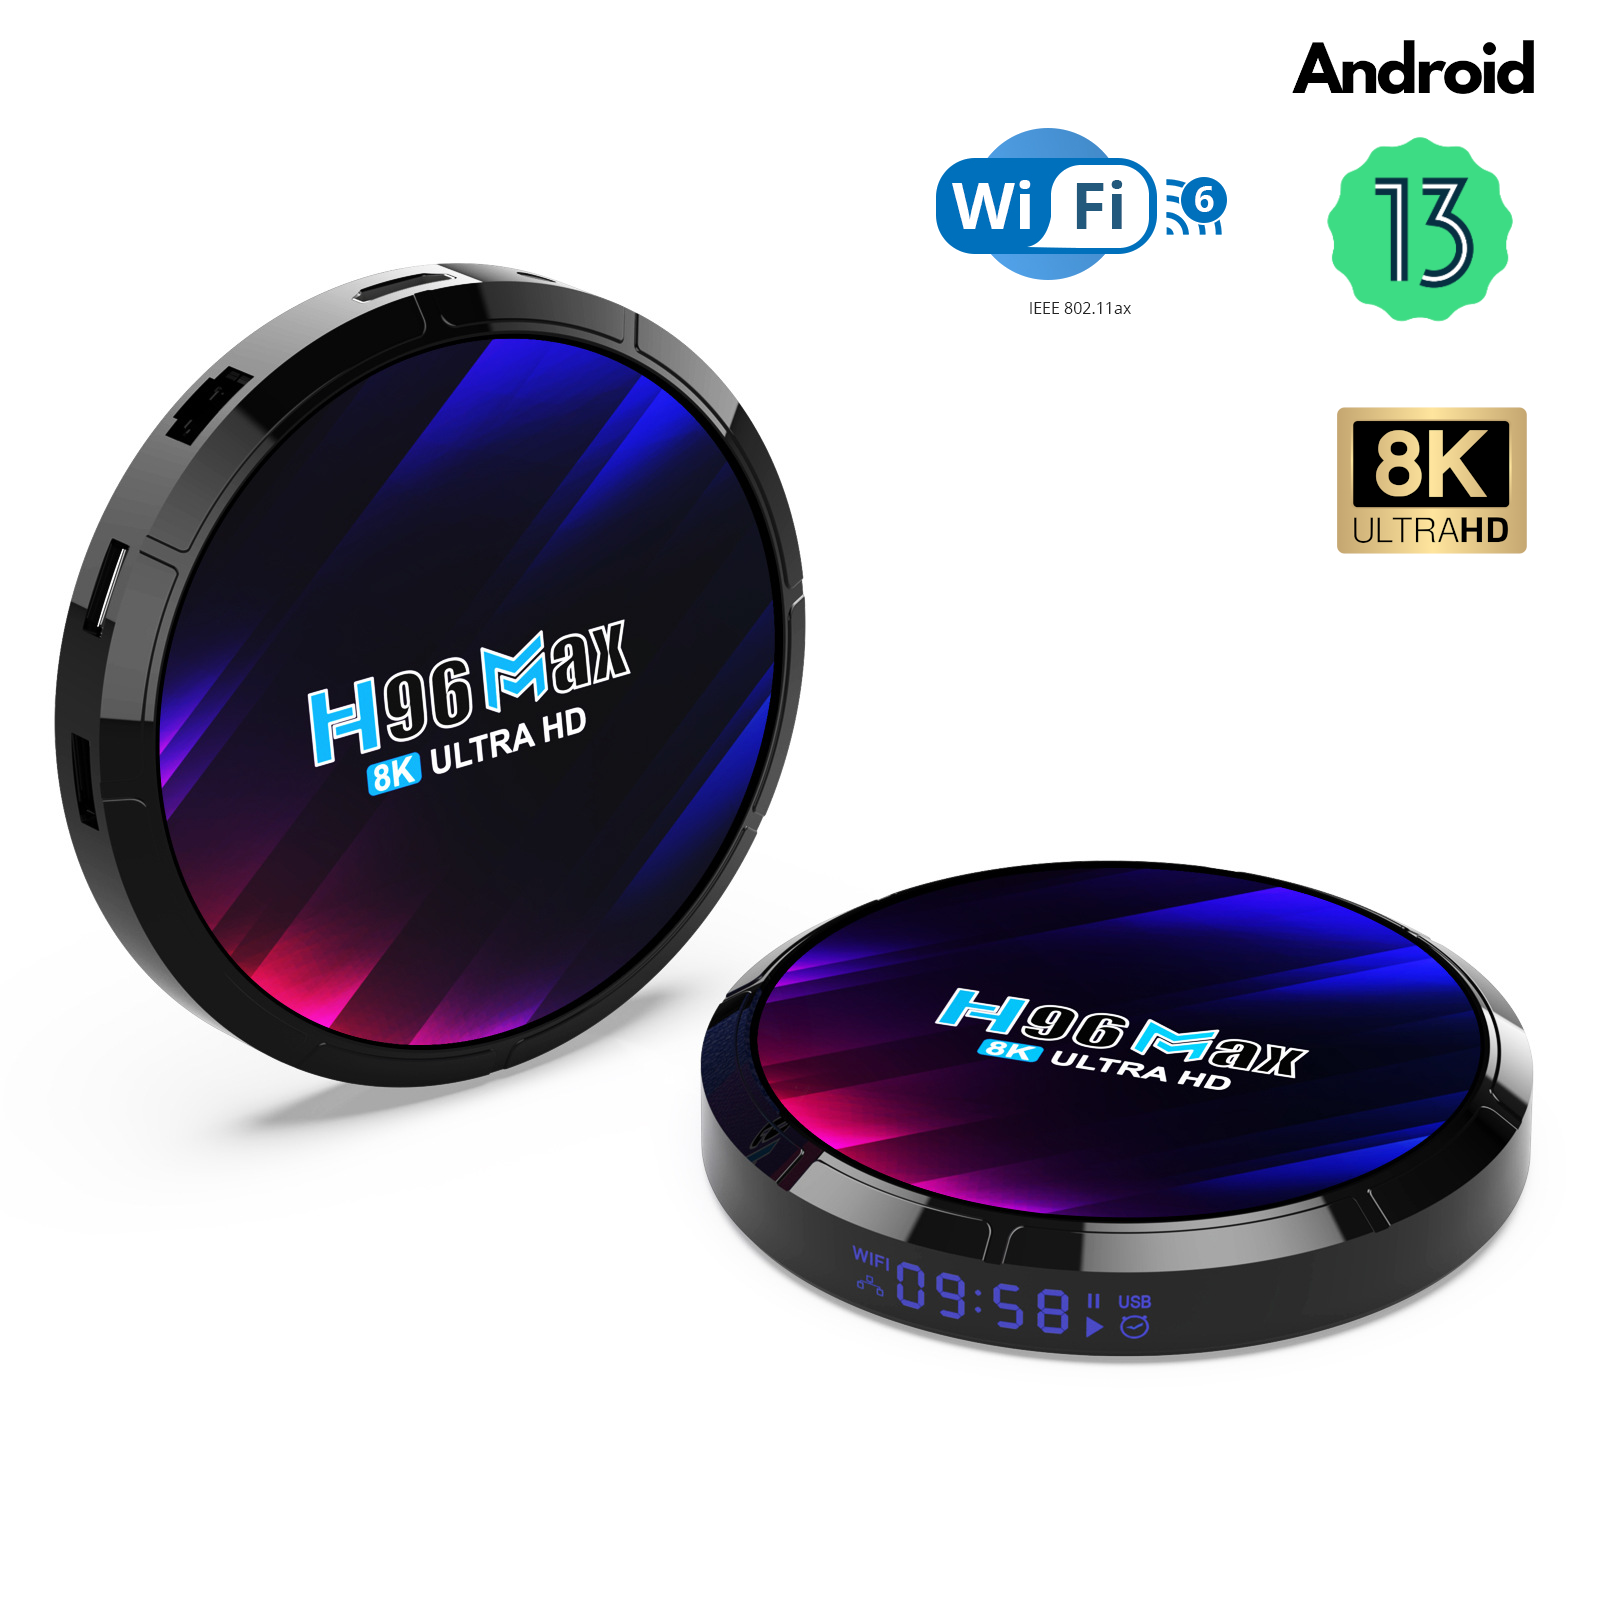 H96 MAX 3566 Android 11 H96 Tv Box With Rockchip RK3566, 8GB RAM,  64GB/128GB Storage, 2.4G/5G WiFi, And 8K Media Player 4G RAM And 32G  Storage Options Available From Streamtech, $51.14